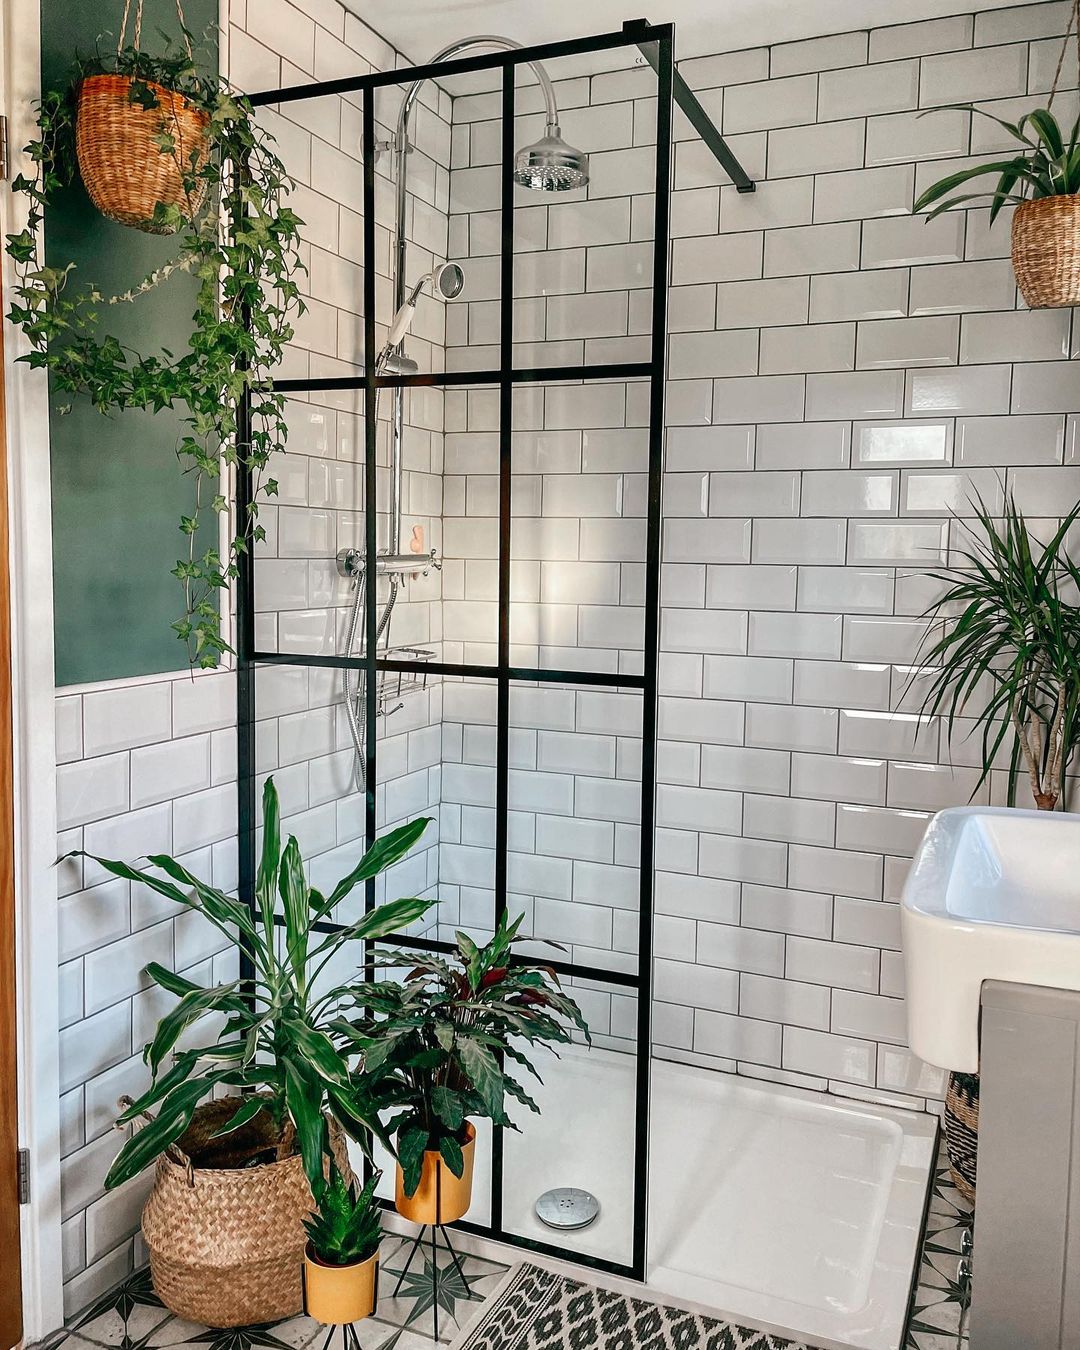 Bathroom featuring several plants. Photo by Instagram user @ahousetomakeourhome.